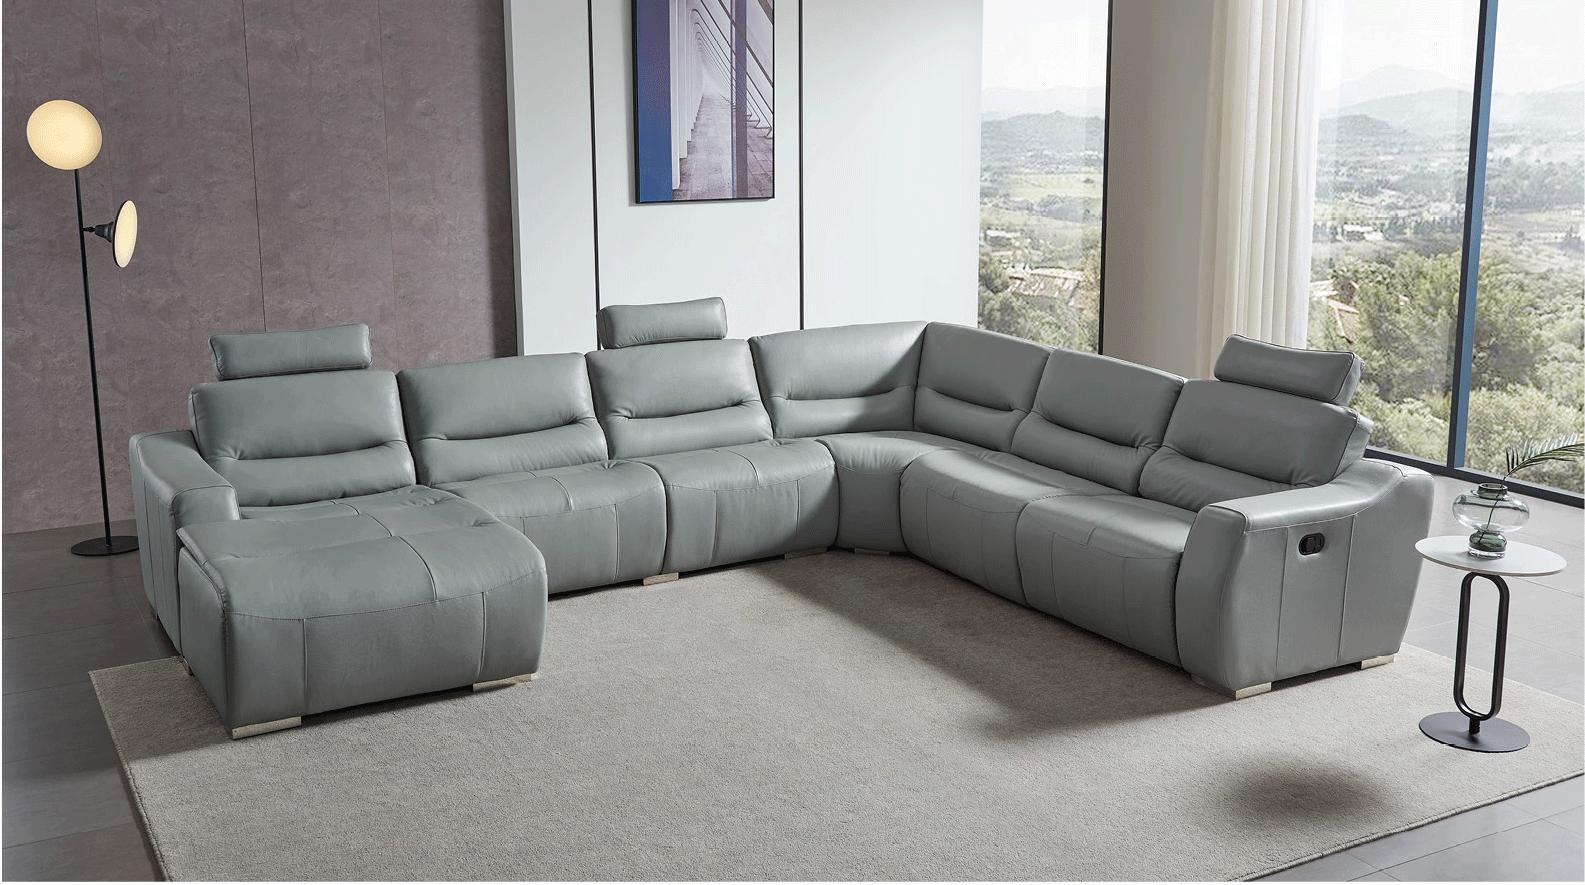 Contemporary, Modern Reclining Sectional 2144 Sectional 2144SECTIONALGREY LEFT in Gray Genuine Leather